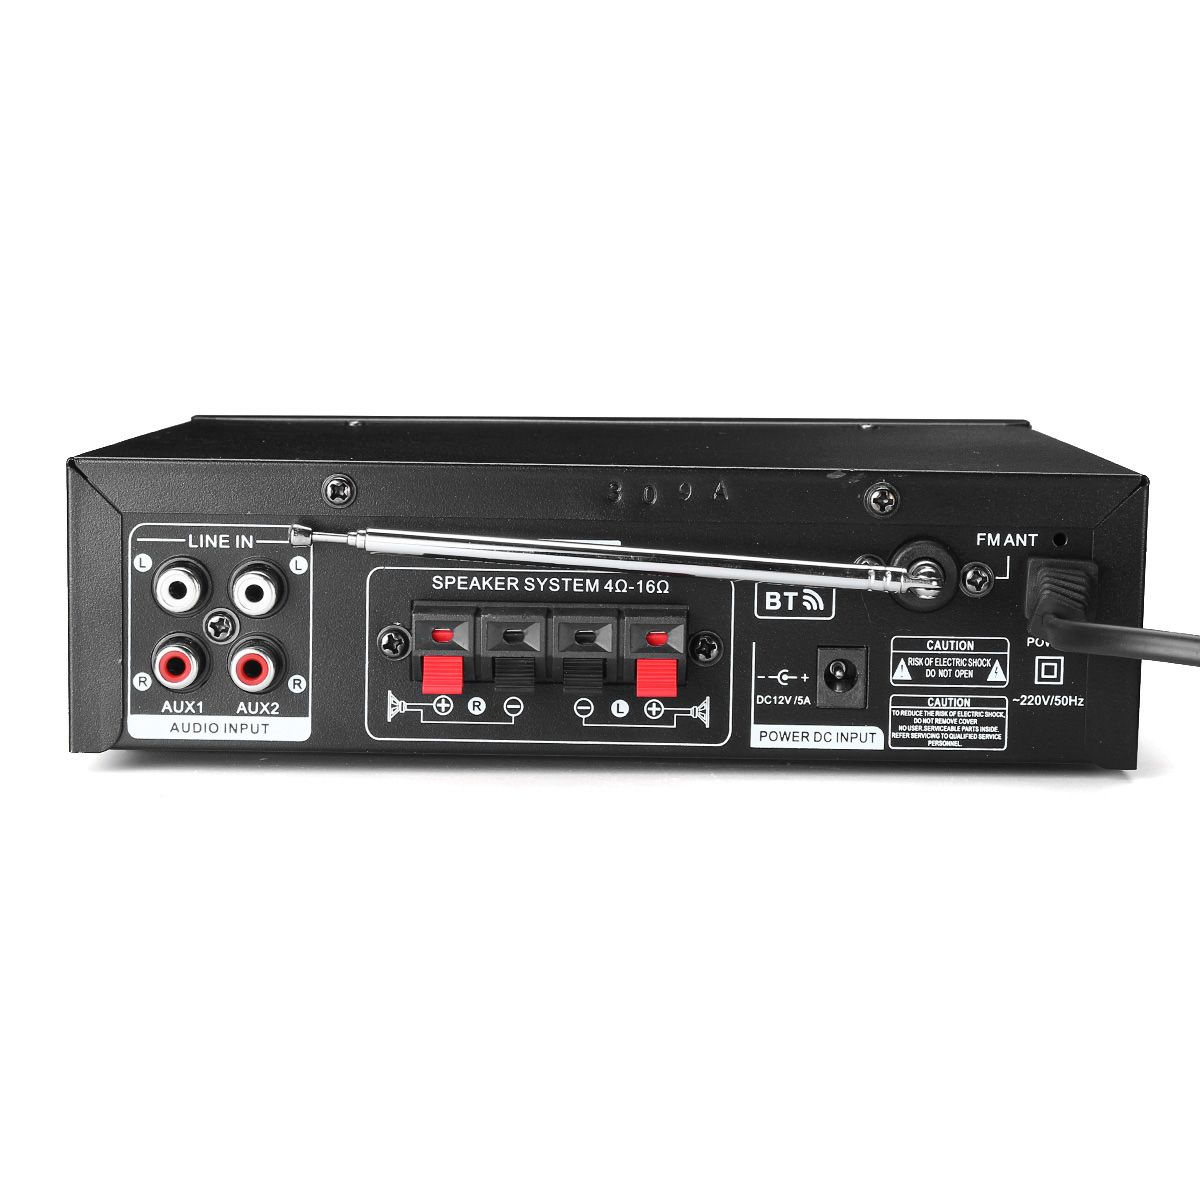 BT-309A-220V-800W-2CH-Home-Stereo-bluetooth-Amplifier-Support-USB-FM-AUX-MIC-Microphone-1601214